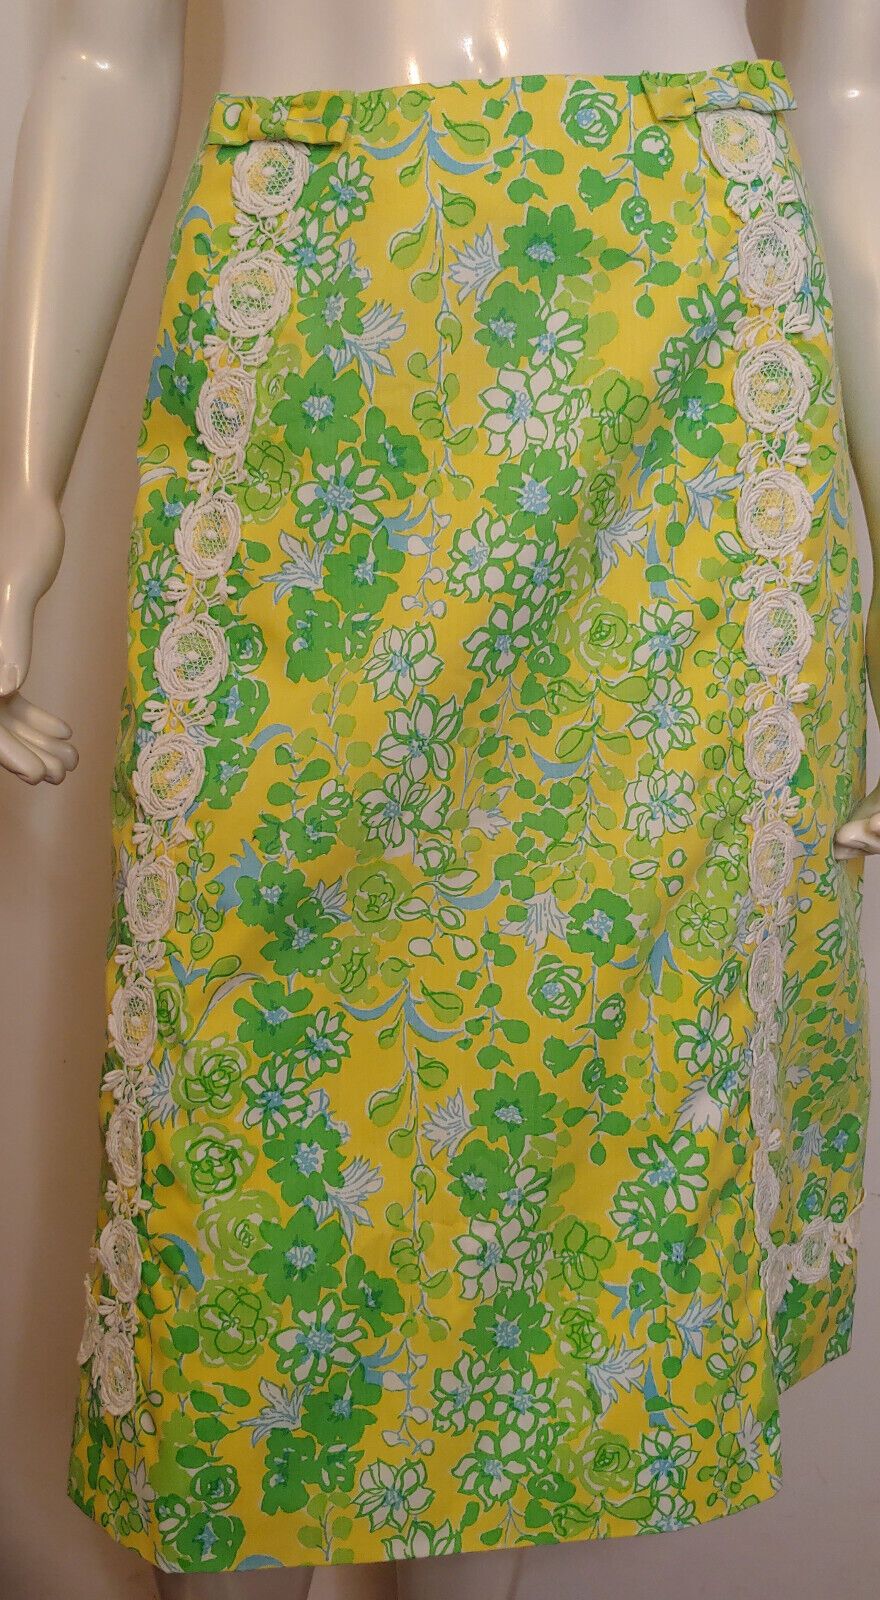 Lilly Pulitzer Yellow & Green Floral Lace Skirt L 14 16 VTG The Lilly Perfect!  | eBay | eBay US